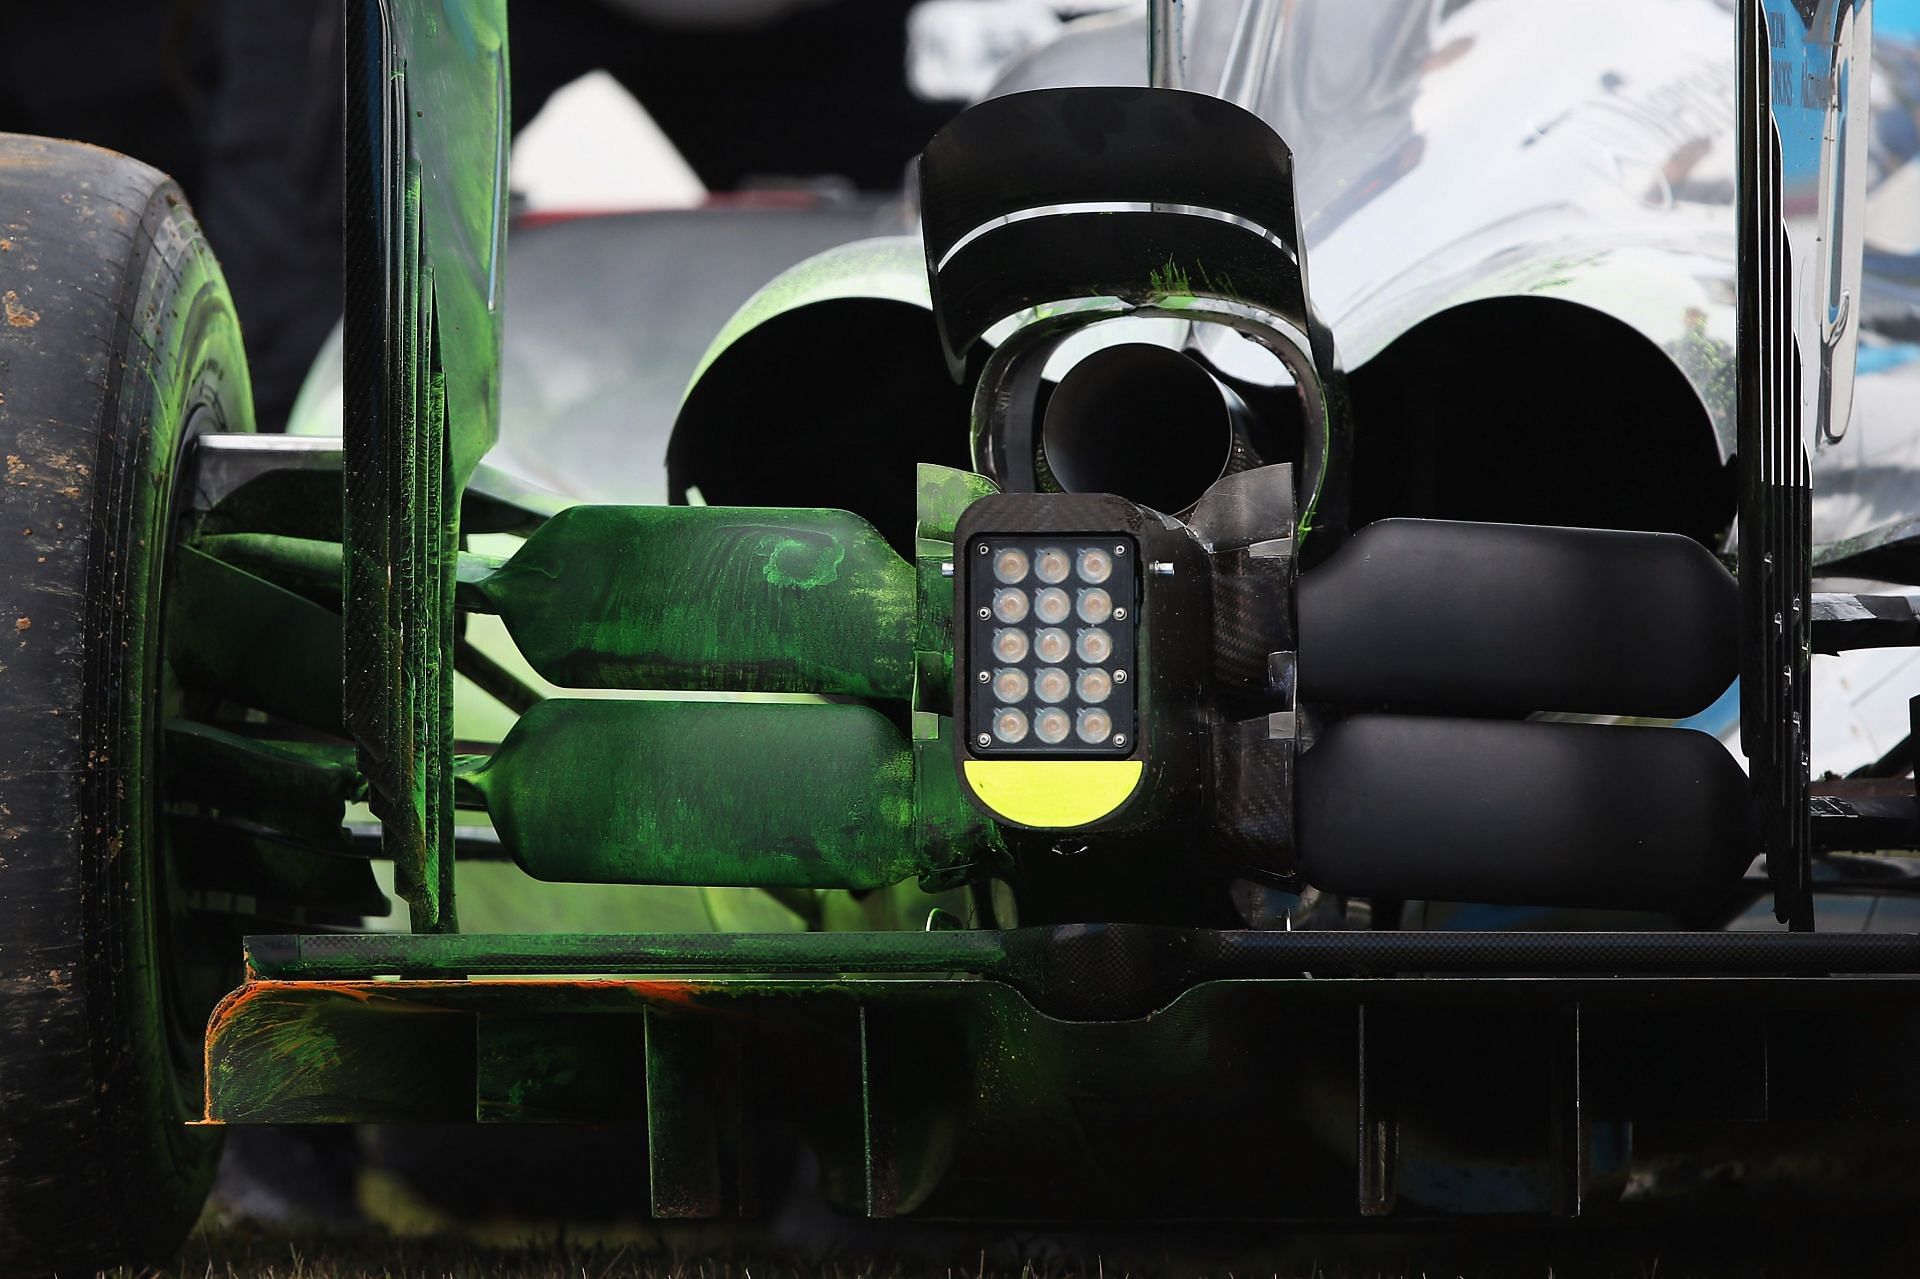 McLaren&#039;s rear blockers caught a lot of intrigue during the 2014 F1 season